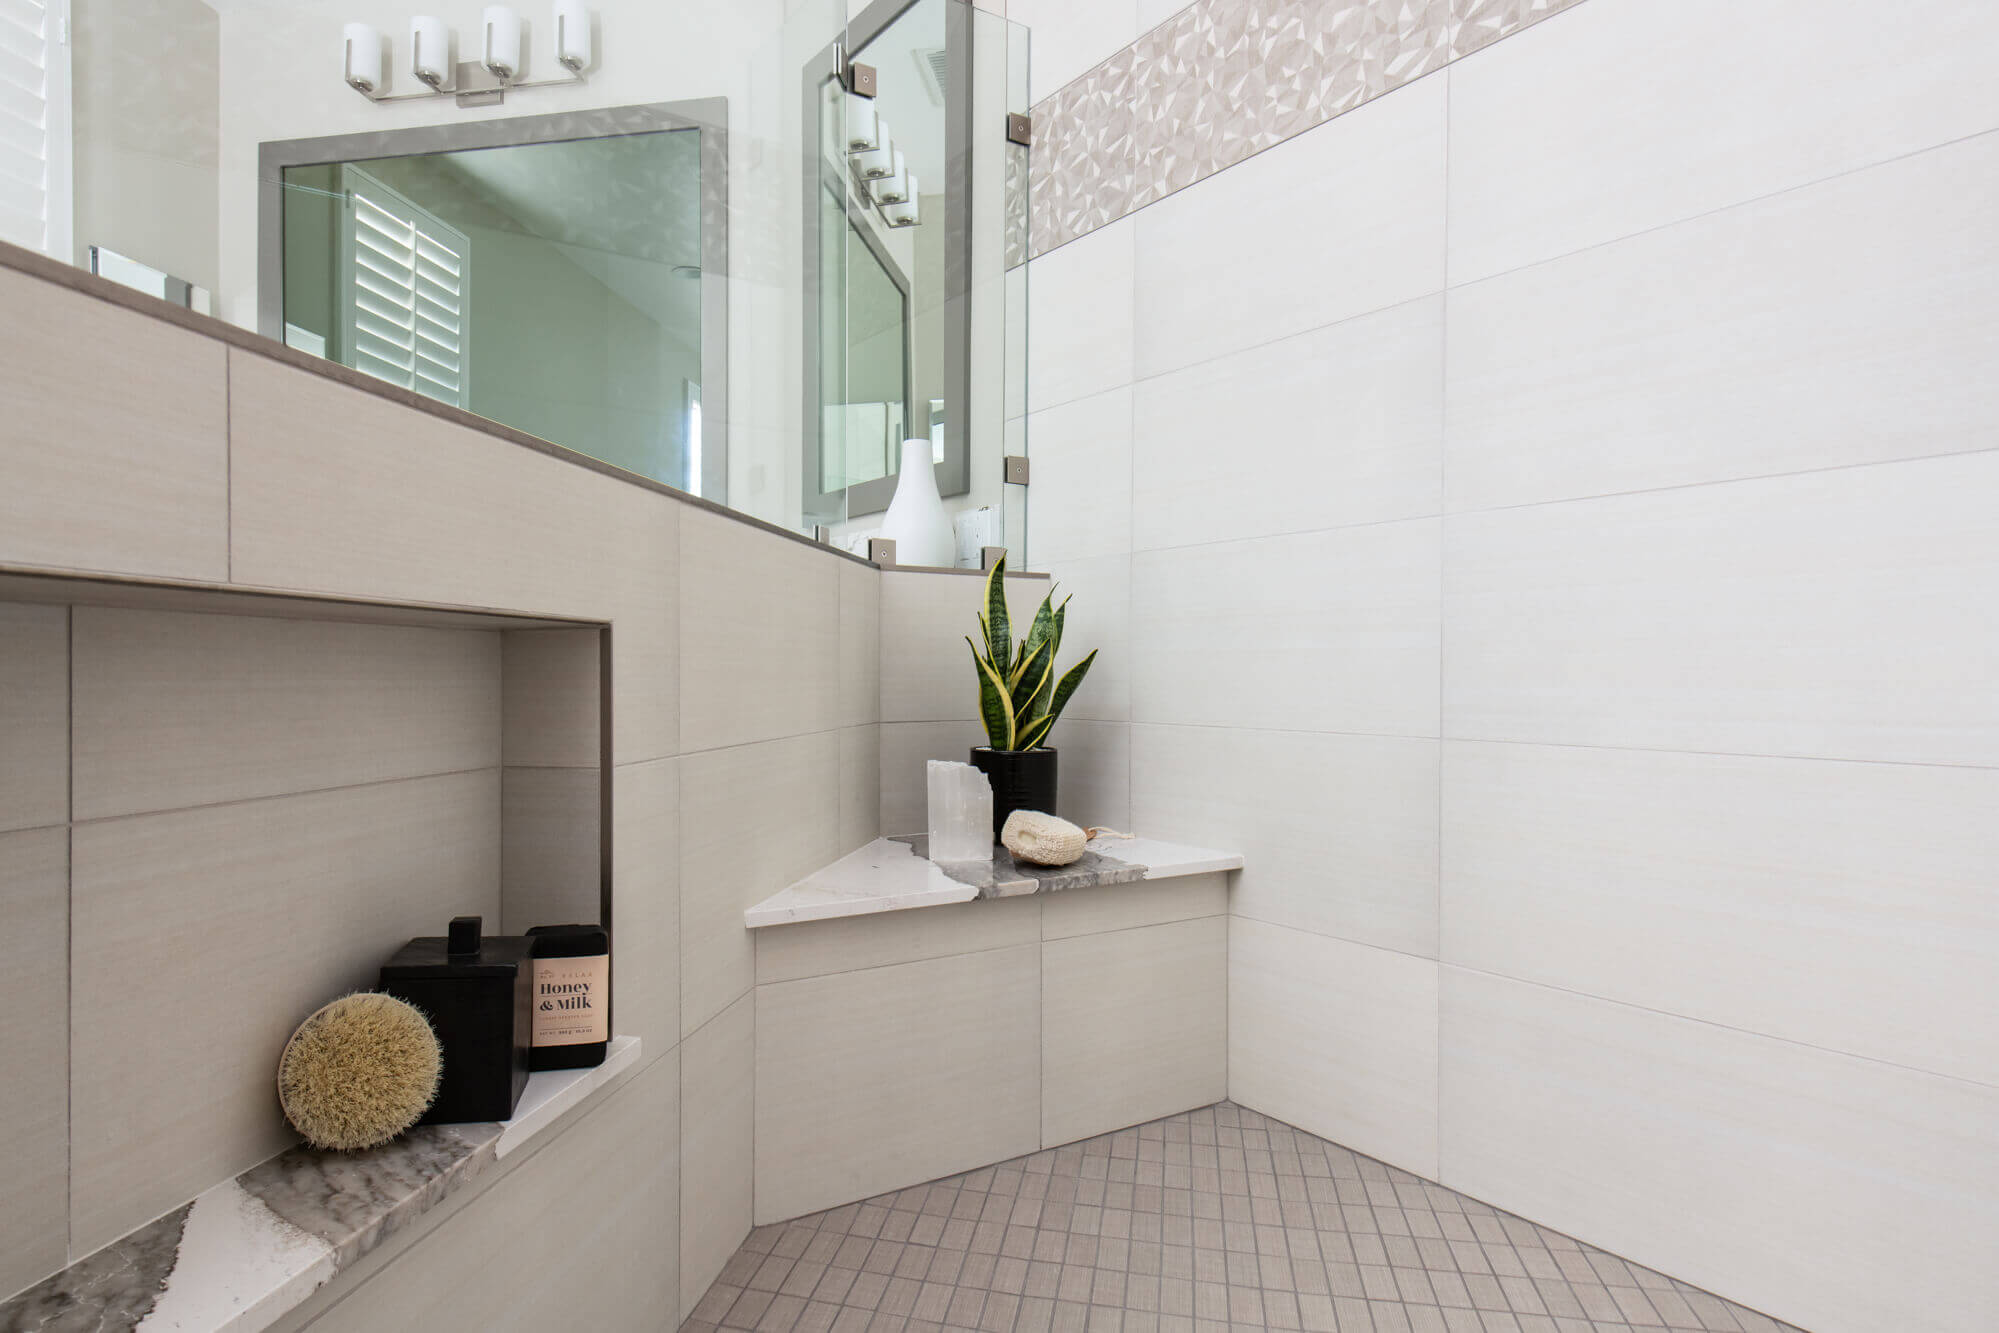 Walk-in shower with custom niches and seating area